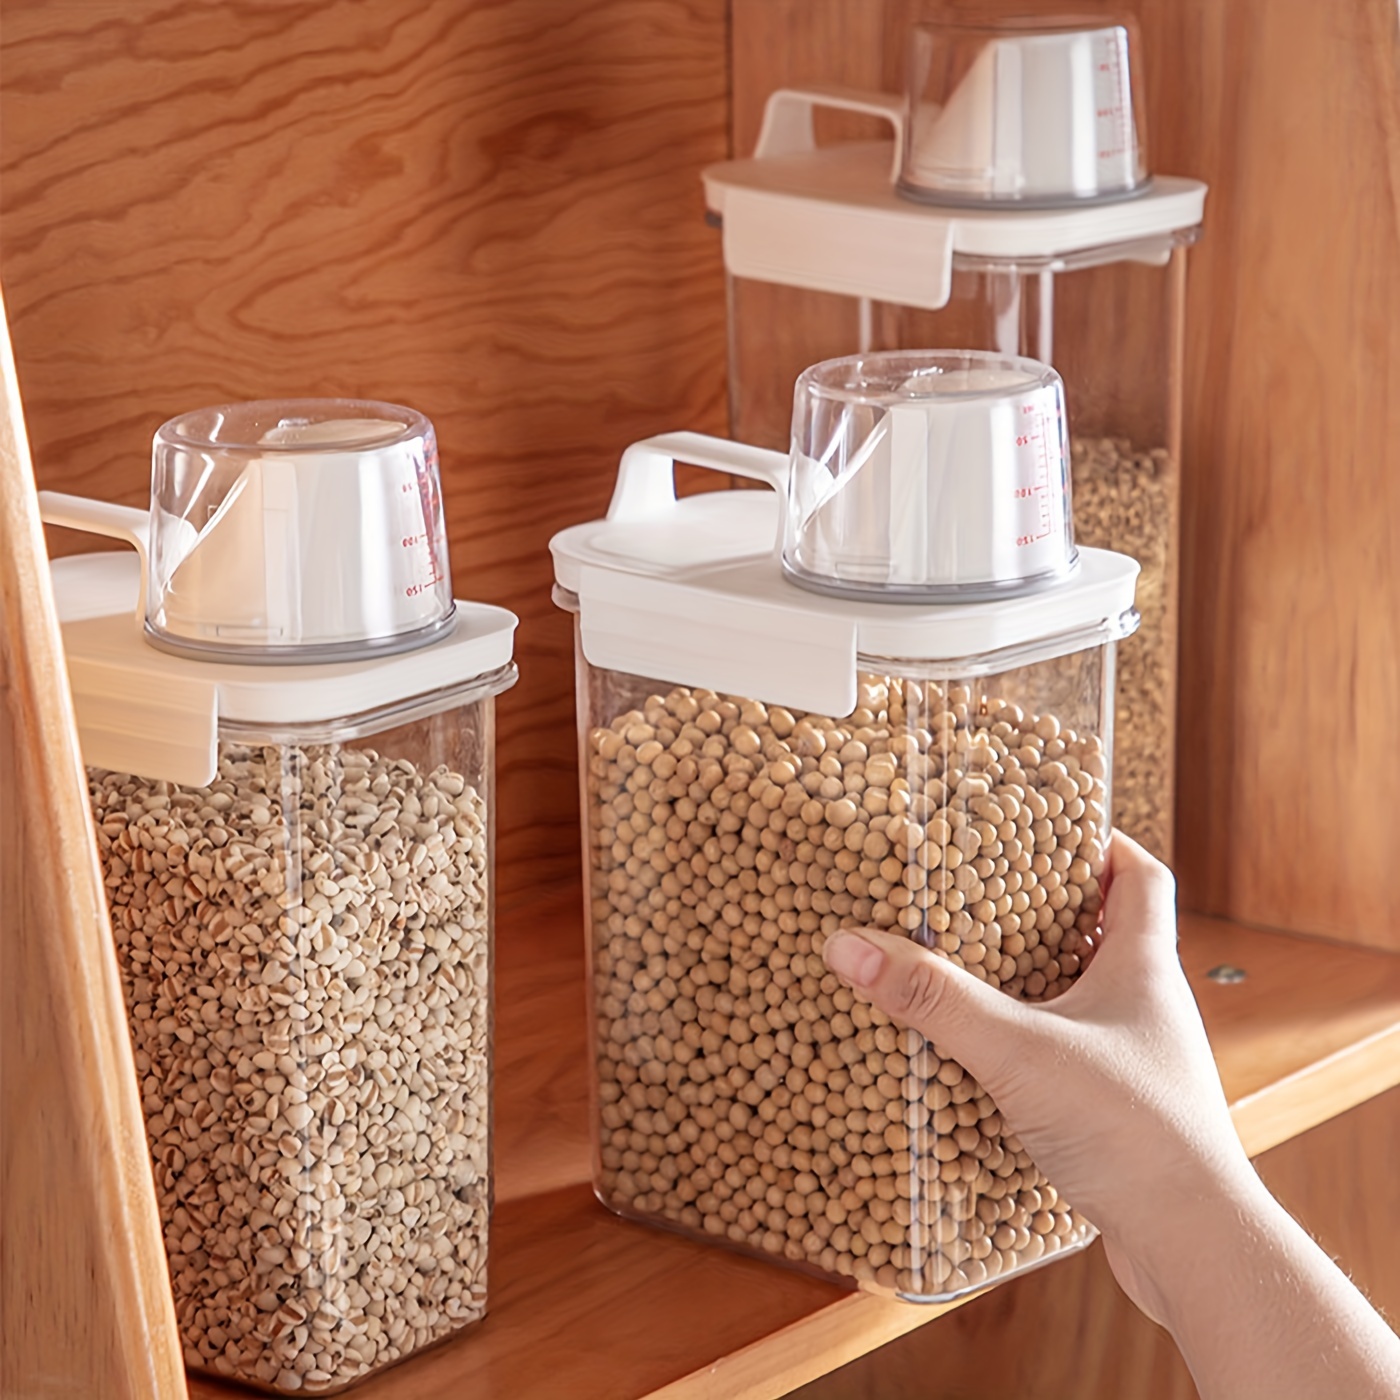 1pc Portable Plastic Food Storage Box, Clear Cereal Storage